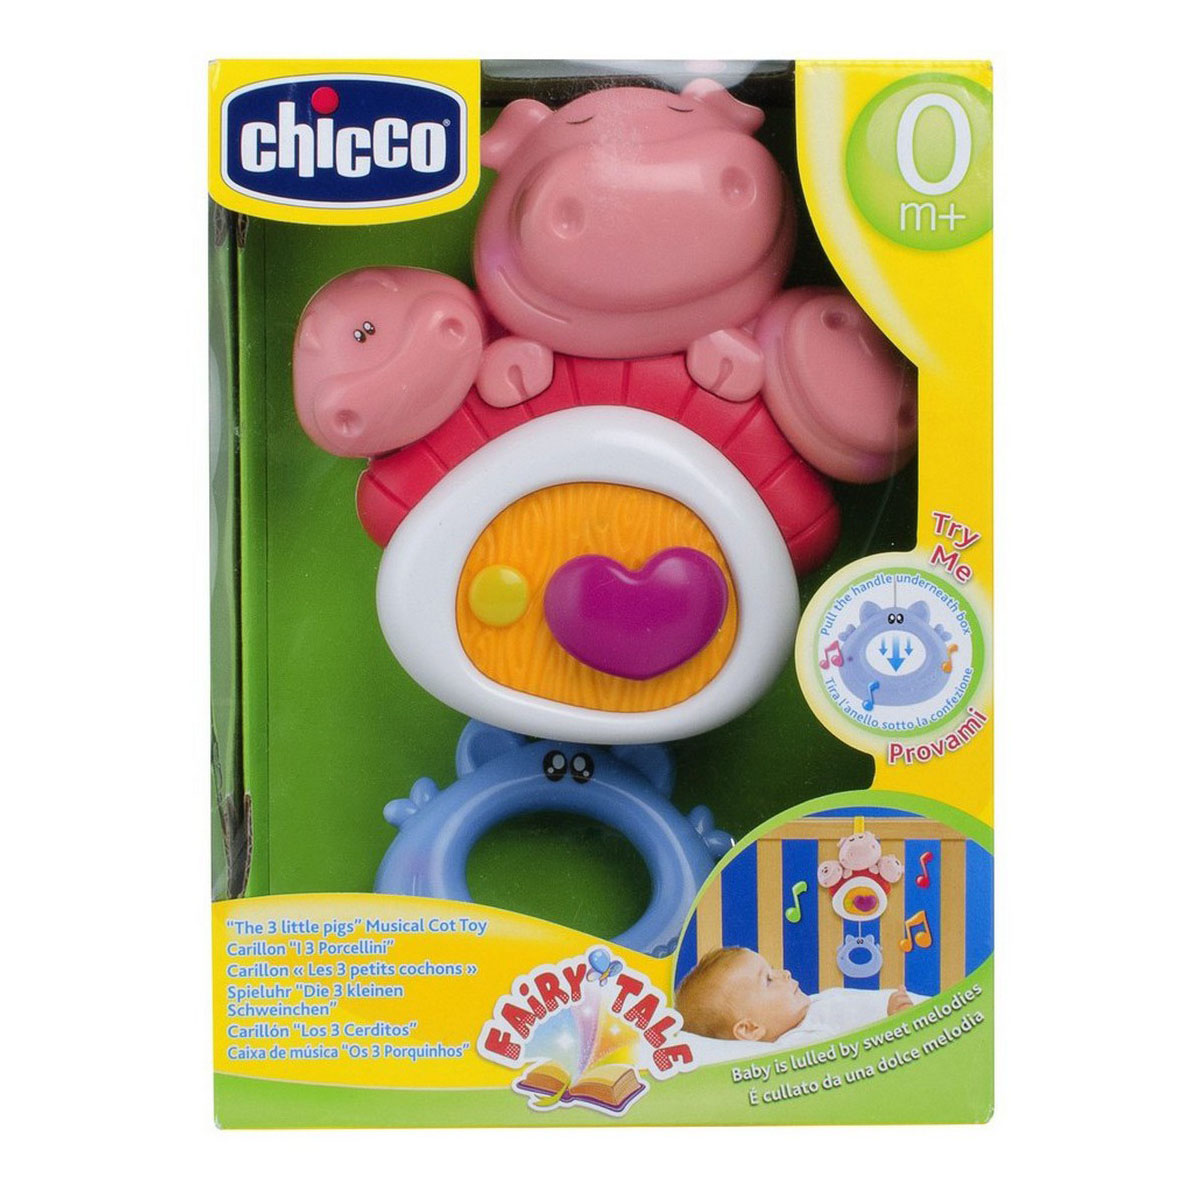 Chicco 3 Little Pigs